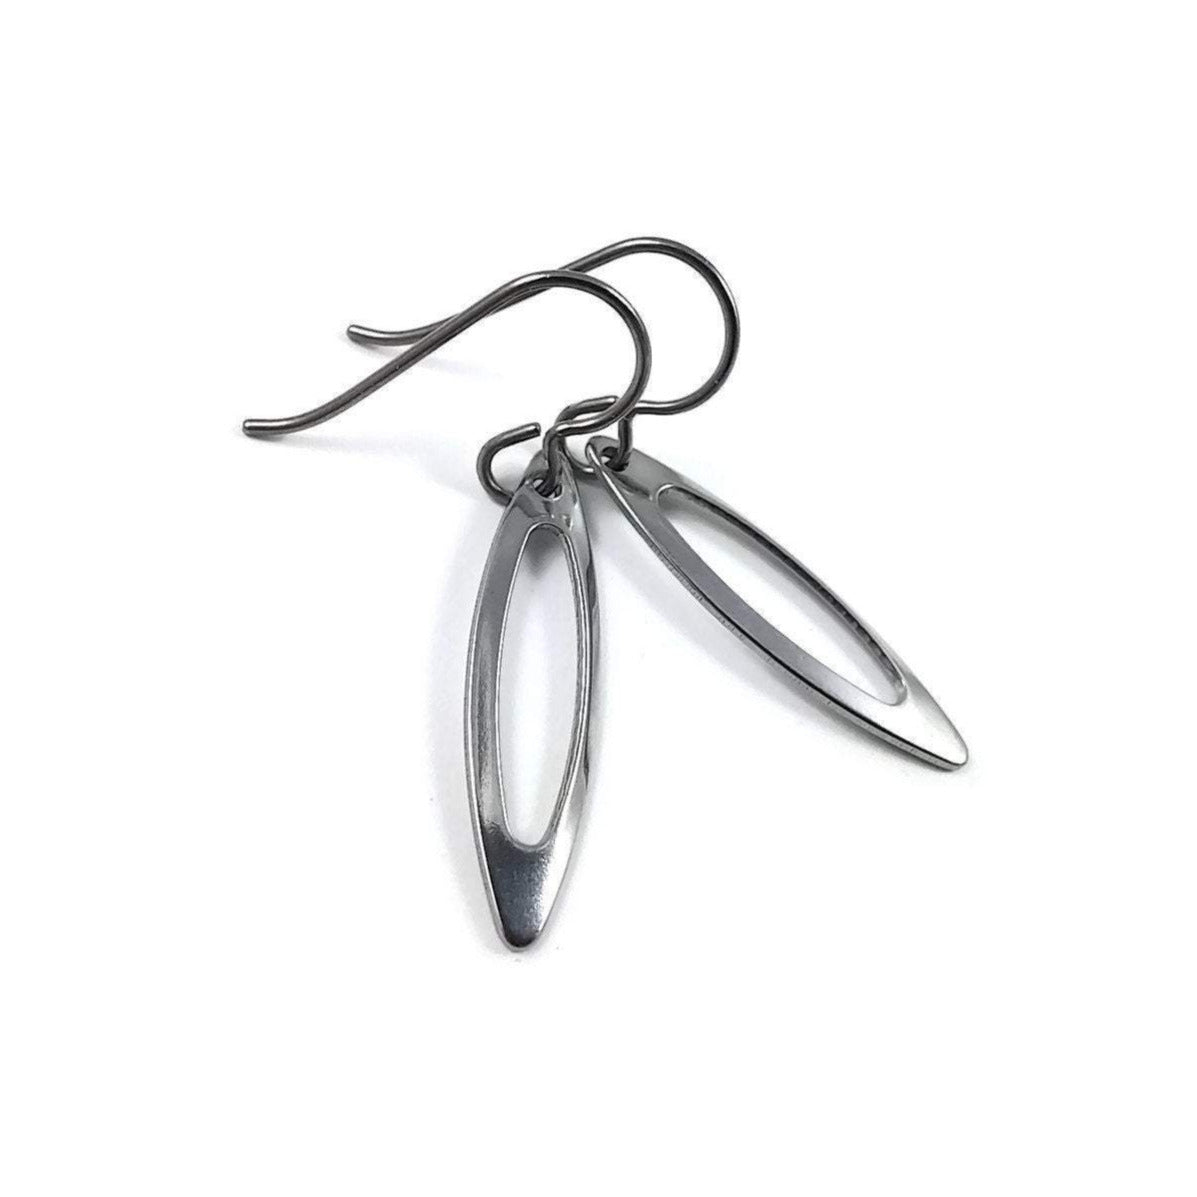 Fine oval dangle earrings - Hypoallergenic pure titanium and stainless steel